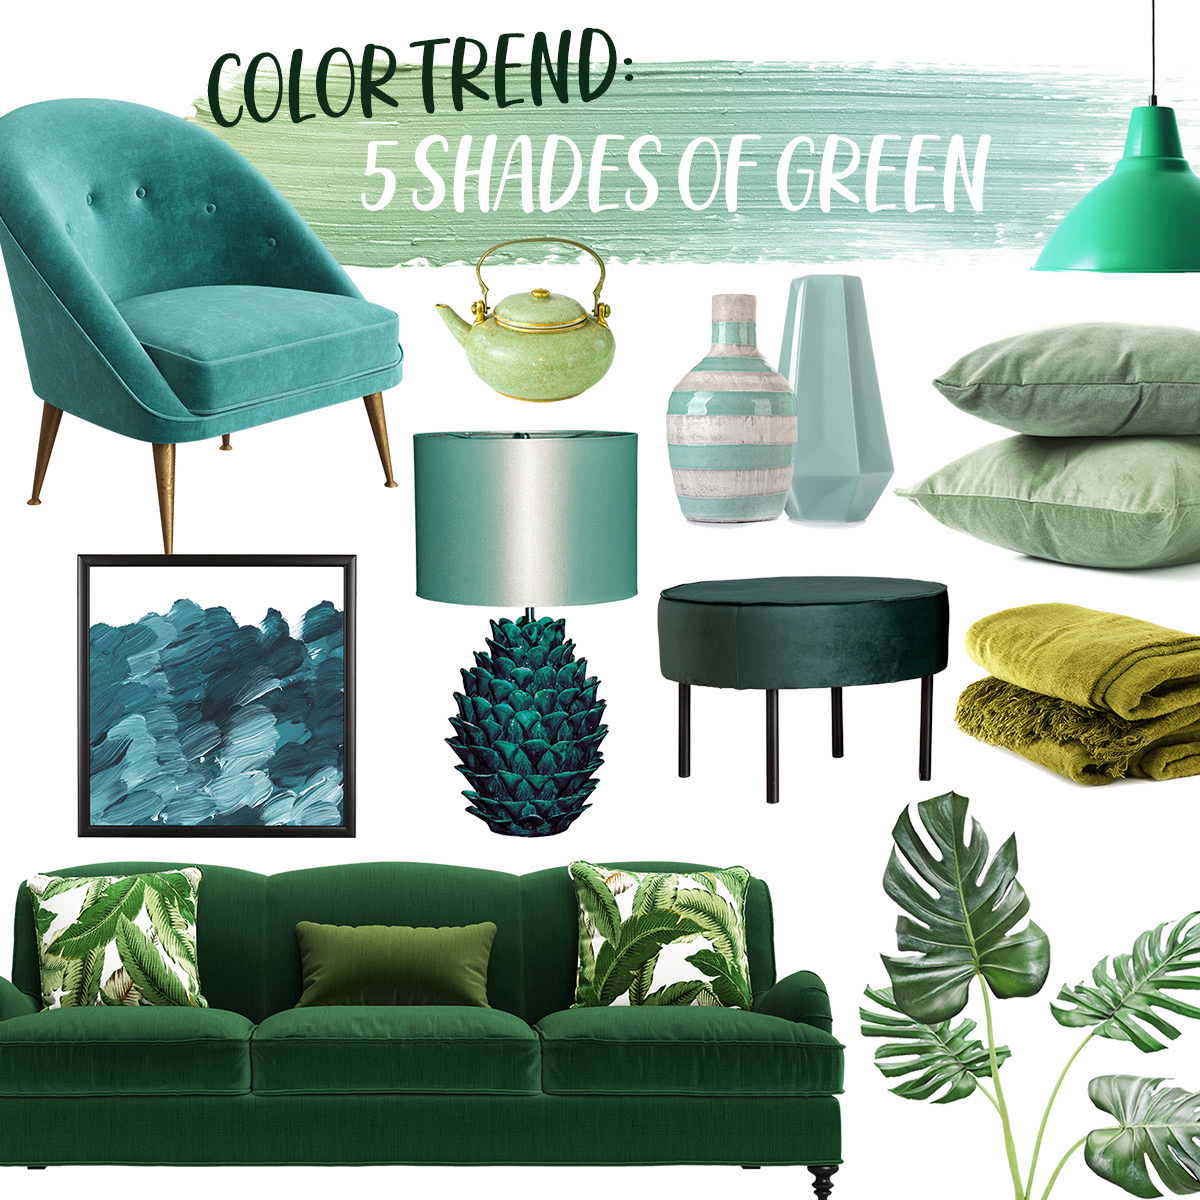 Color trend – 5 shades of green